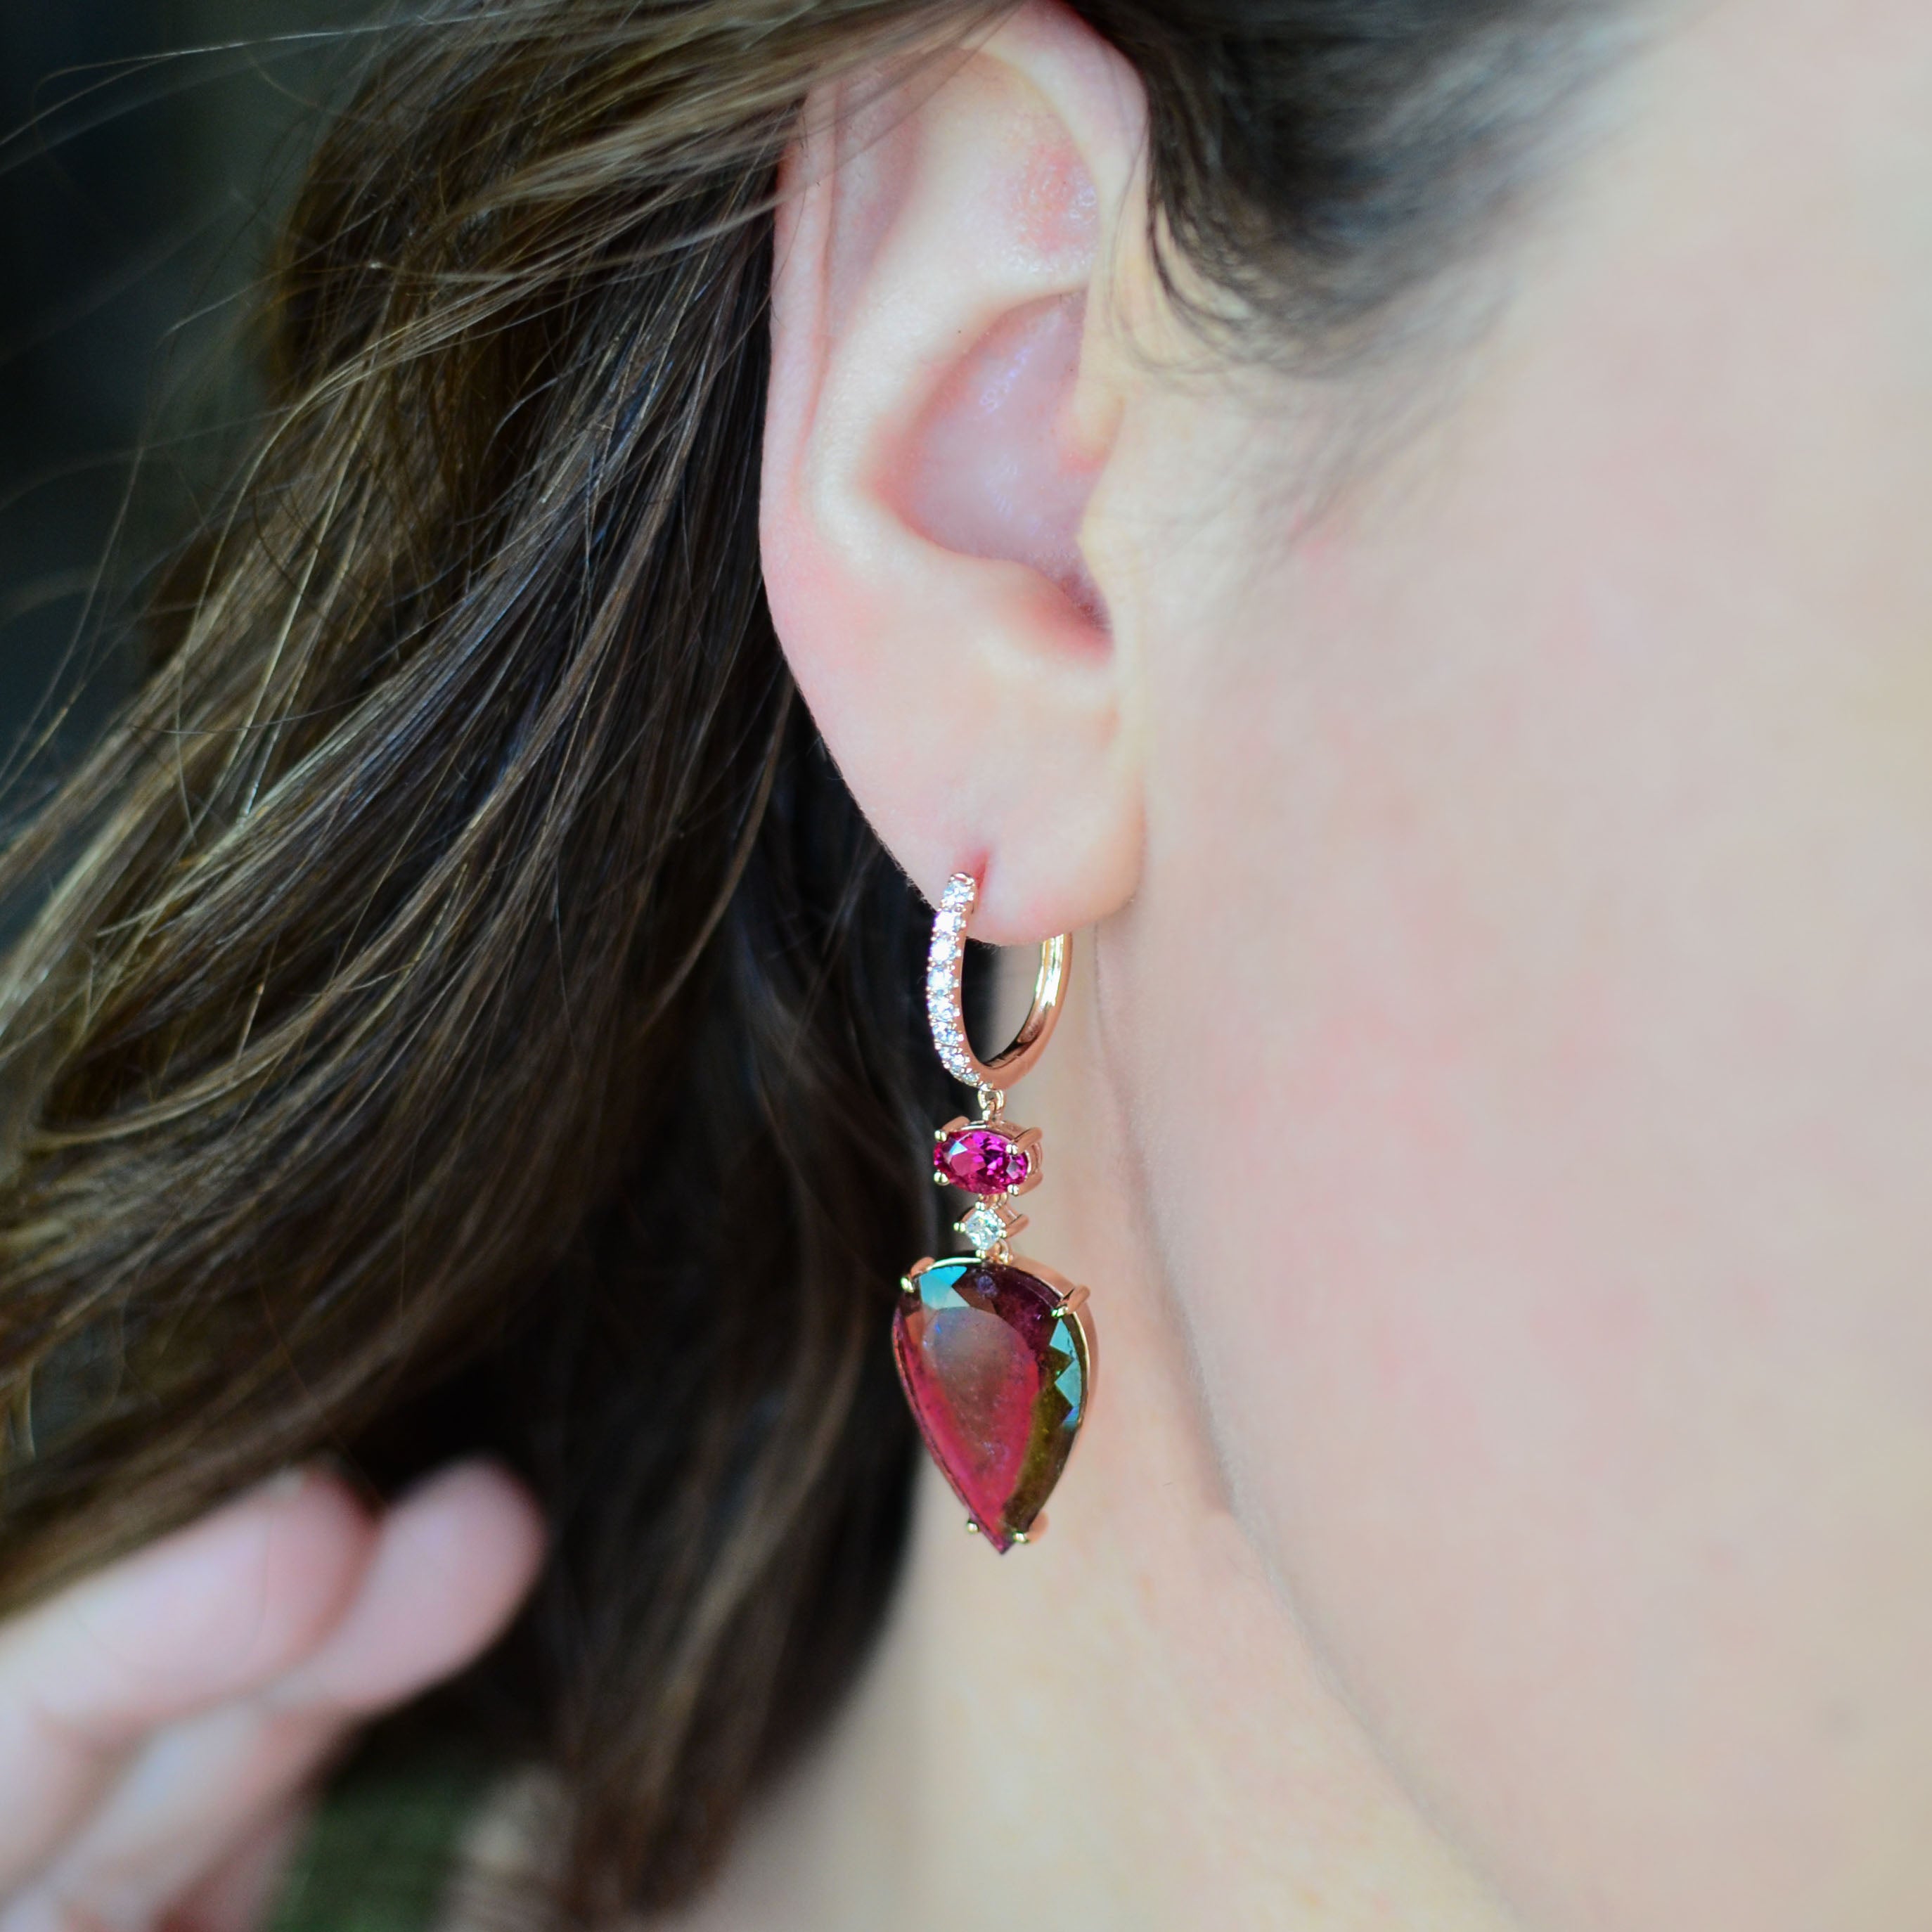 Statement Elegance: Tourmaline Slice Earrings with Dazzling Gemstone Accents